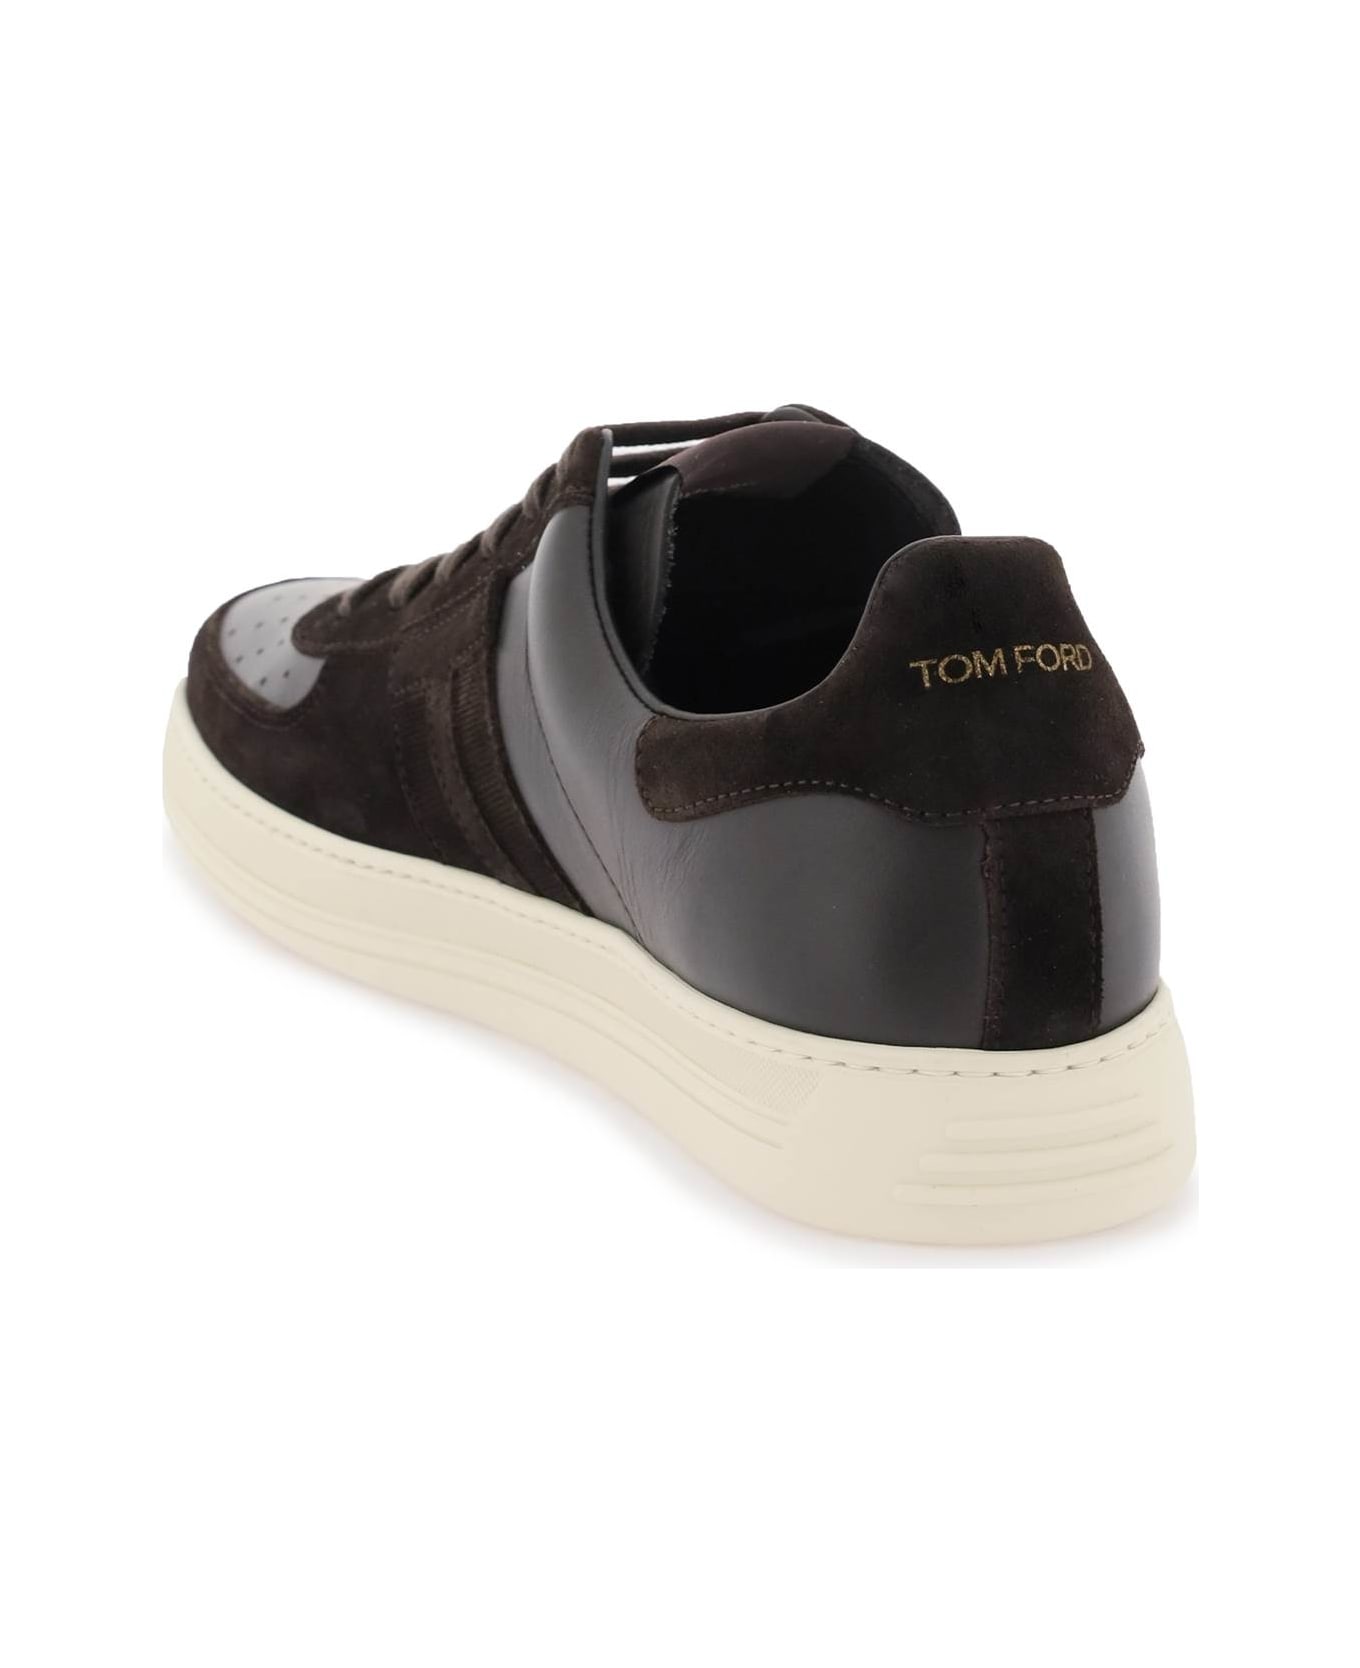 Tom Ford Suede And Leather 'radcliffe' Sneakers - BROWN CREAM (Brown) スニーカー